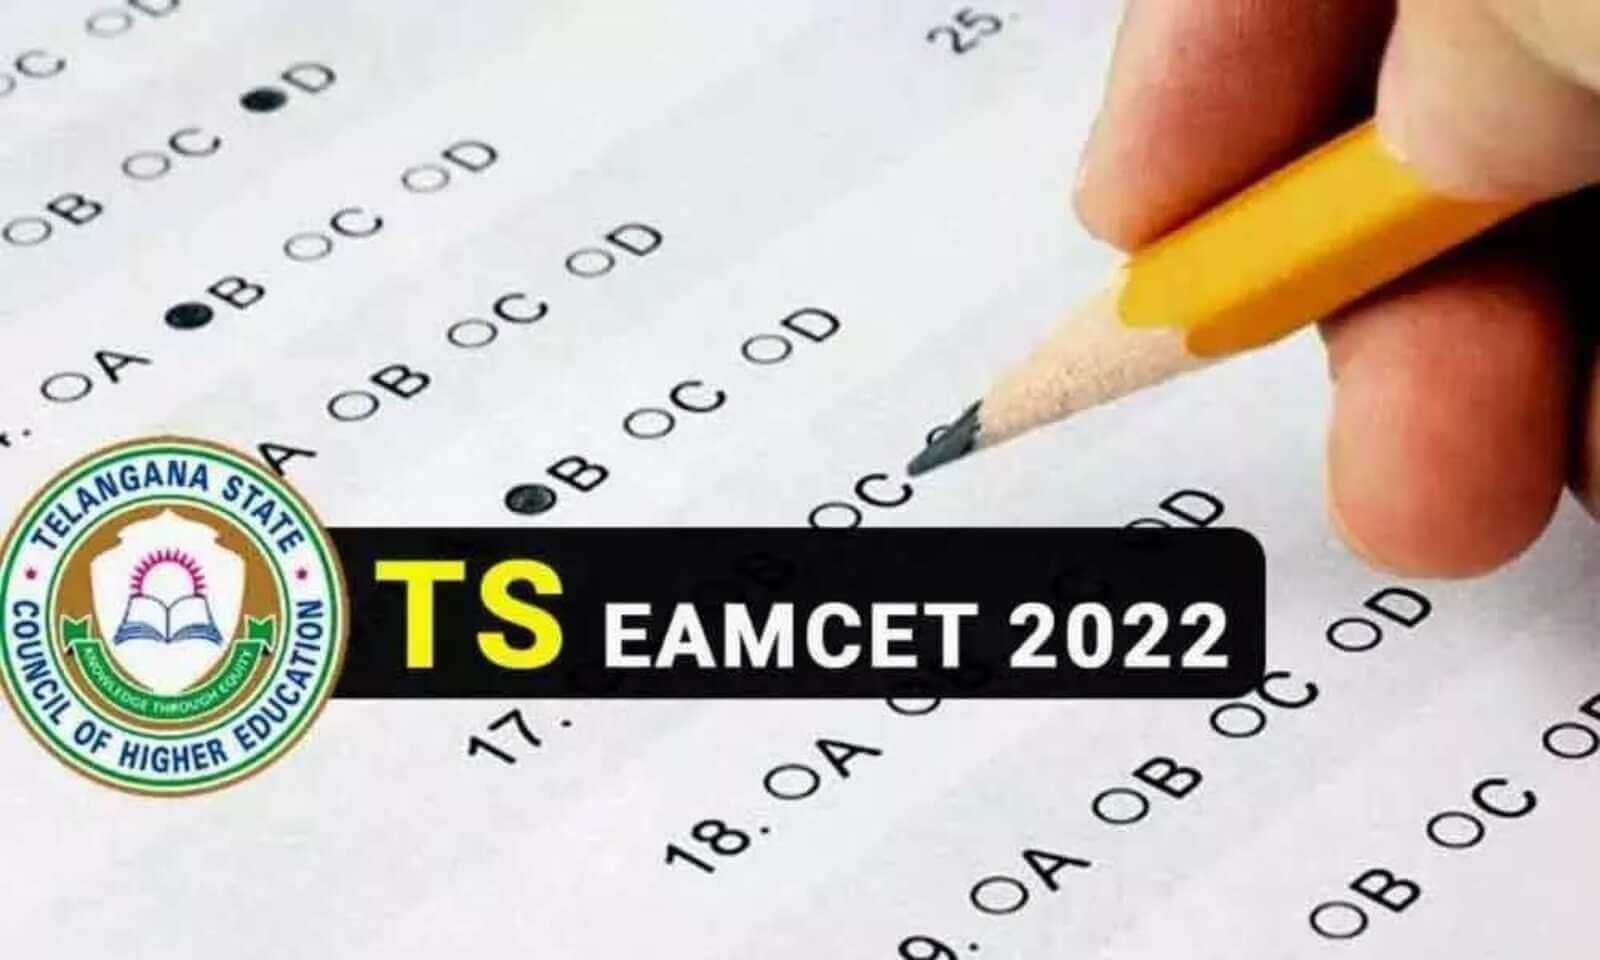 TS EAMCET 2022 results to be out next week